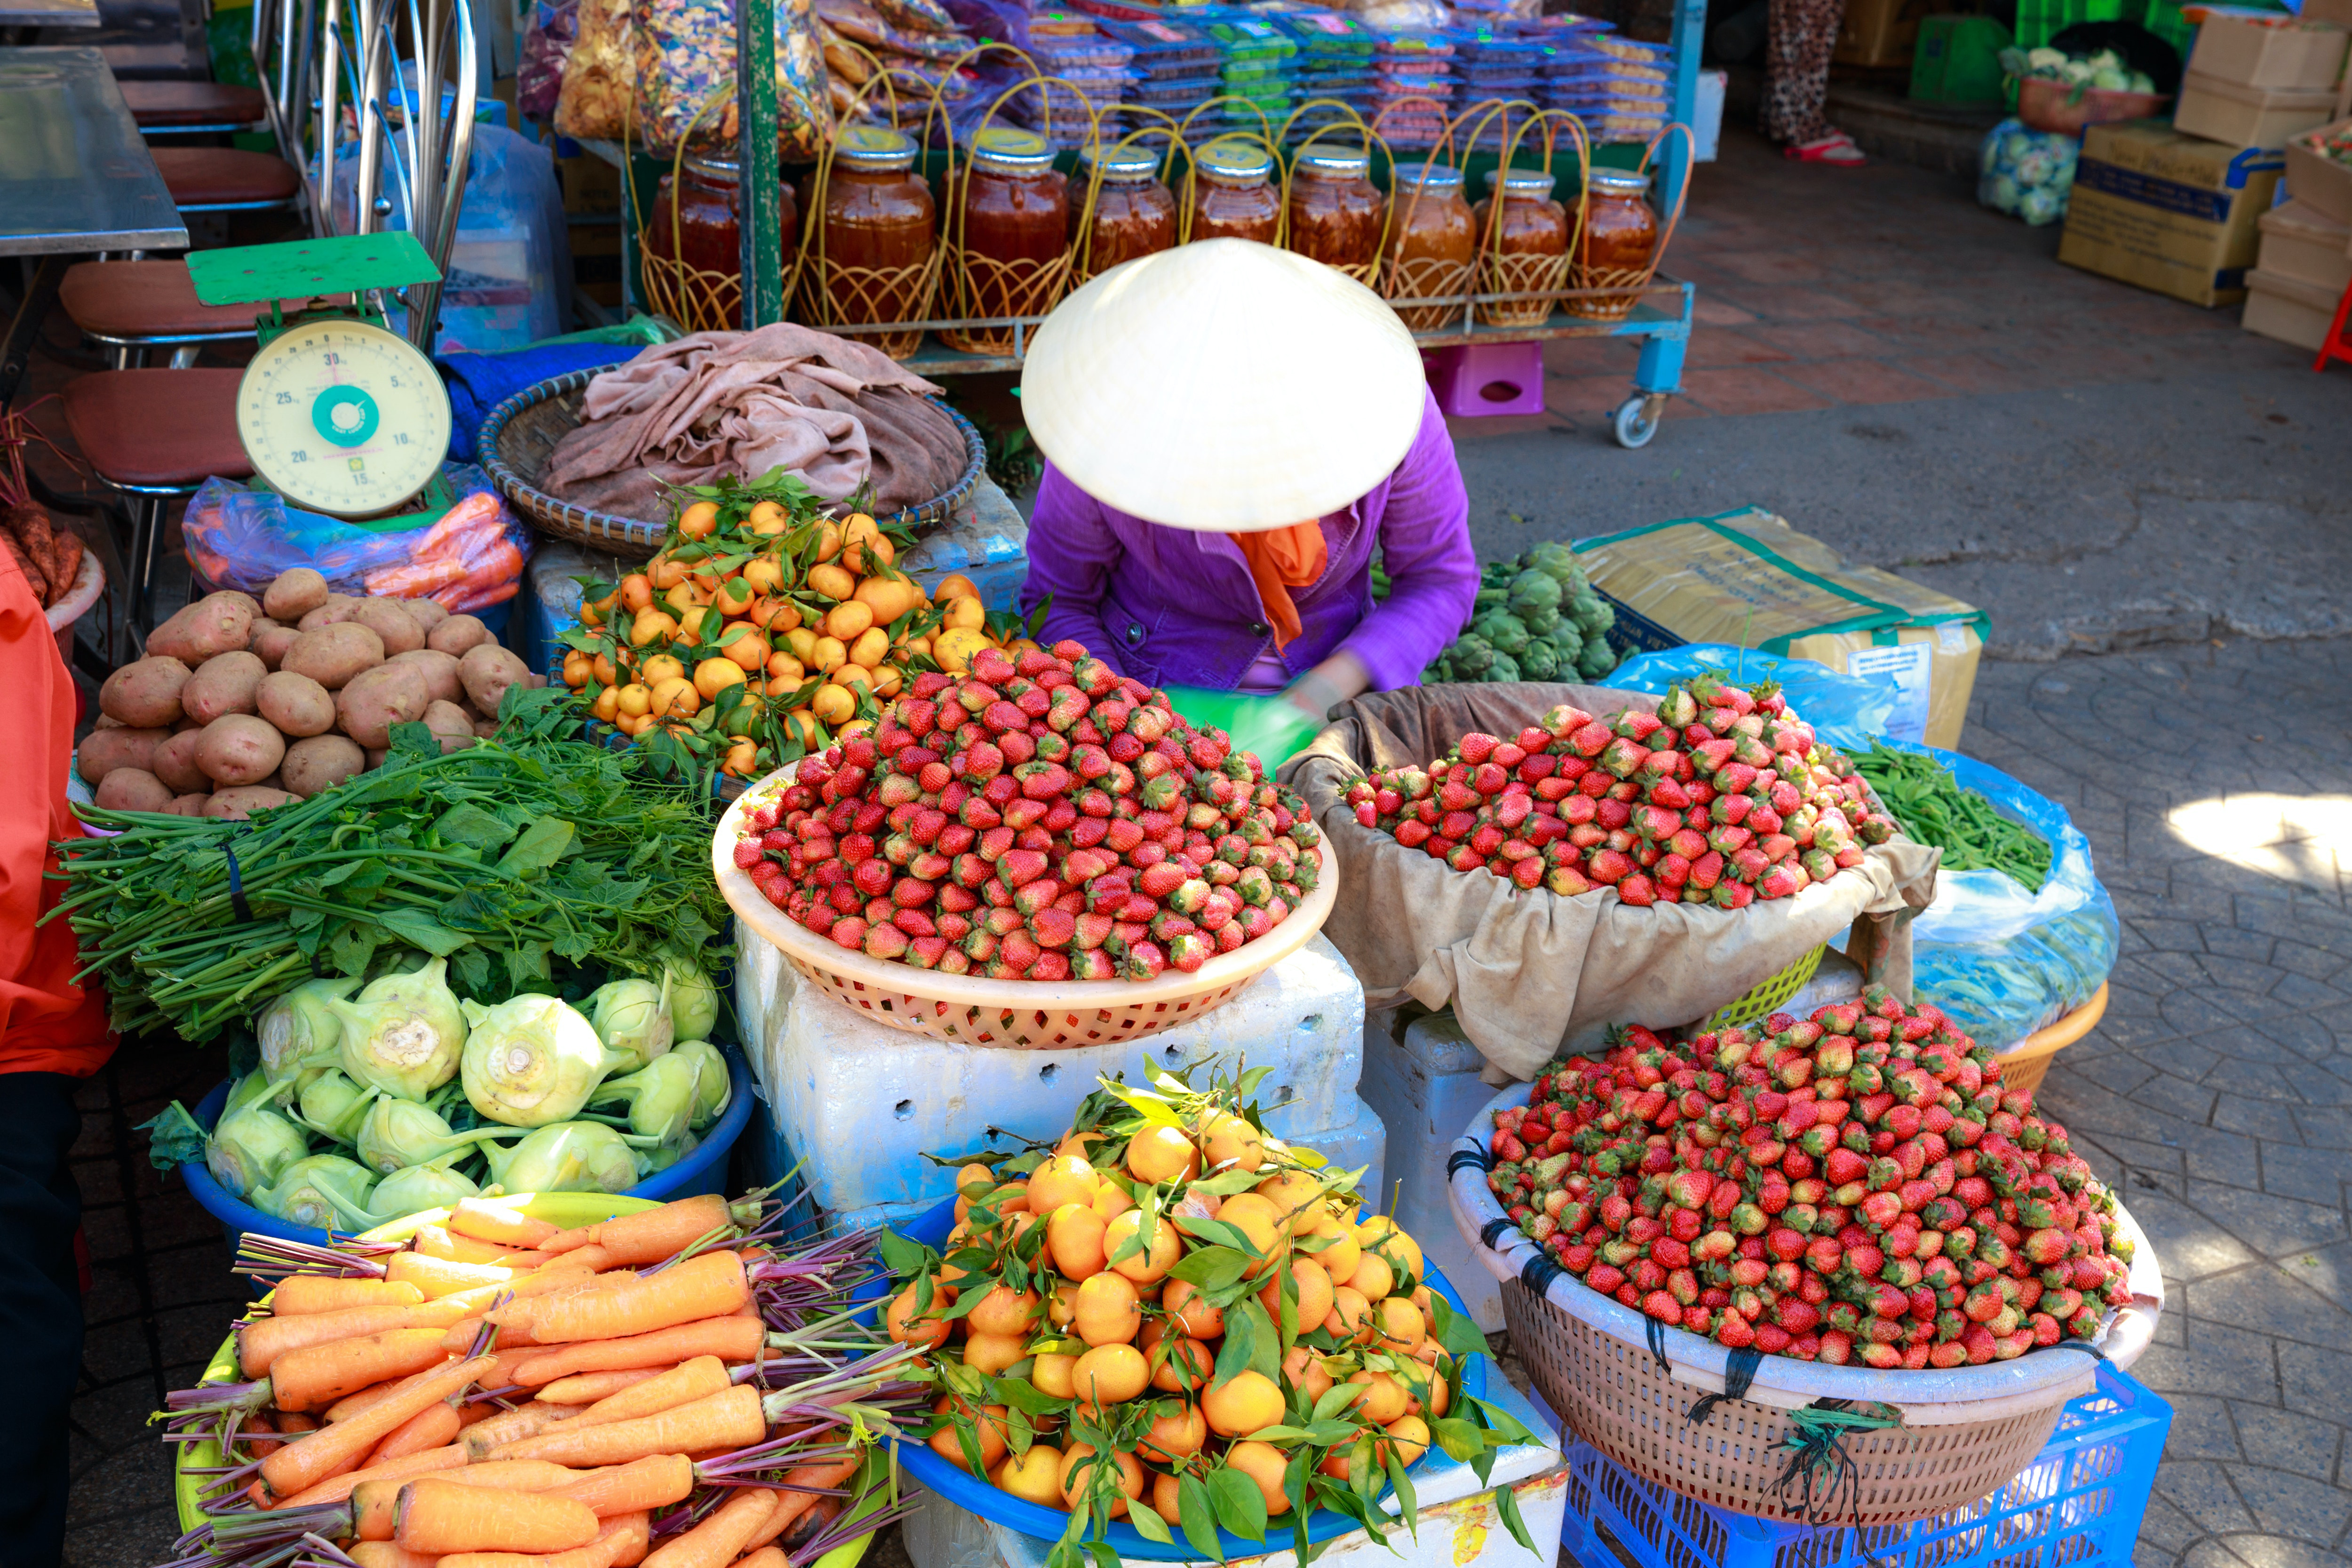 Fruit and vegetable market trader. Photo by Quang Nguyen Vinh from Pexels